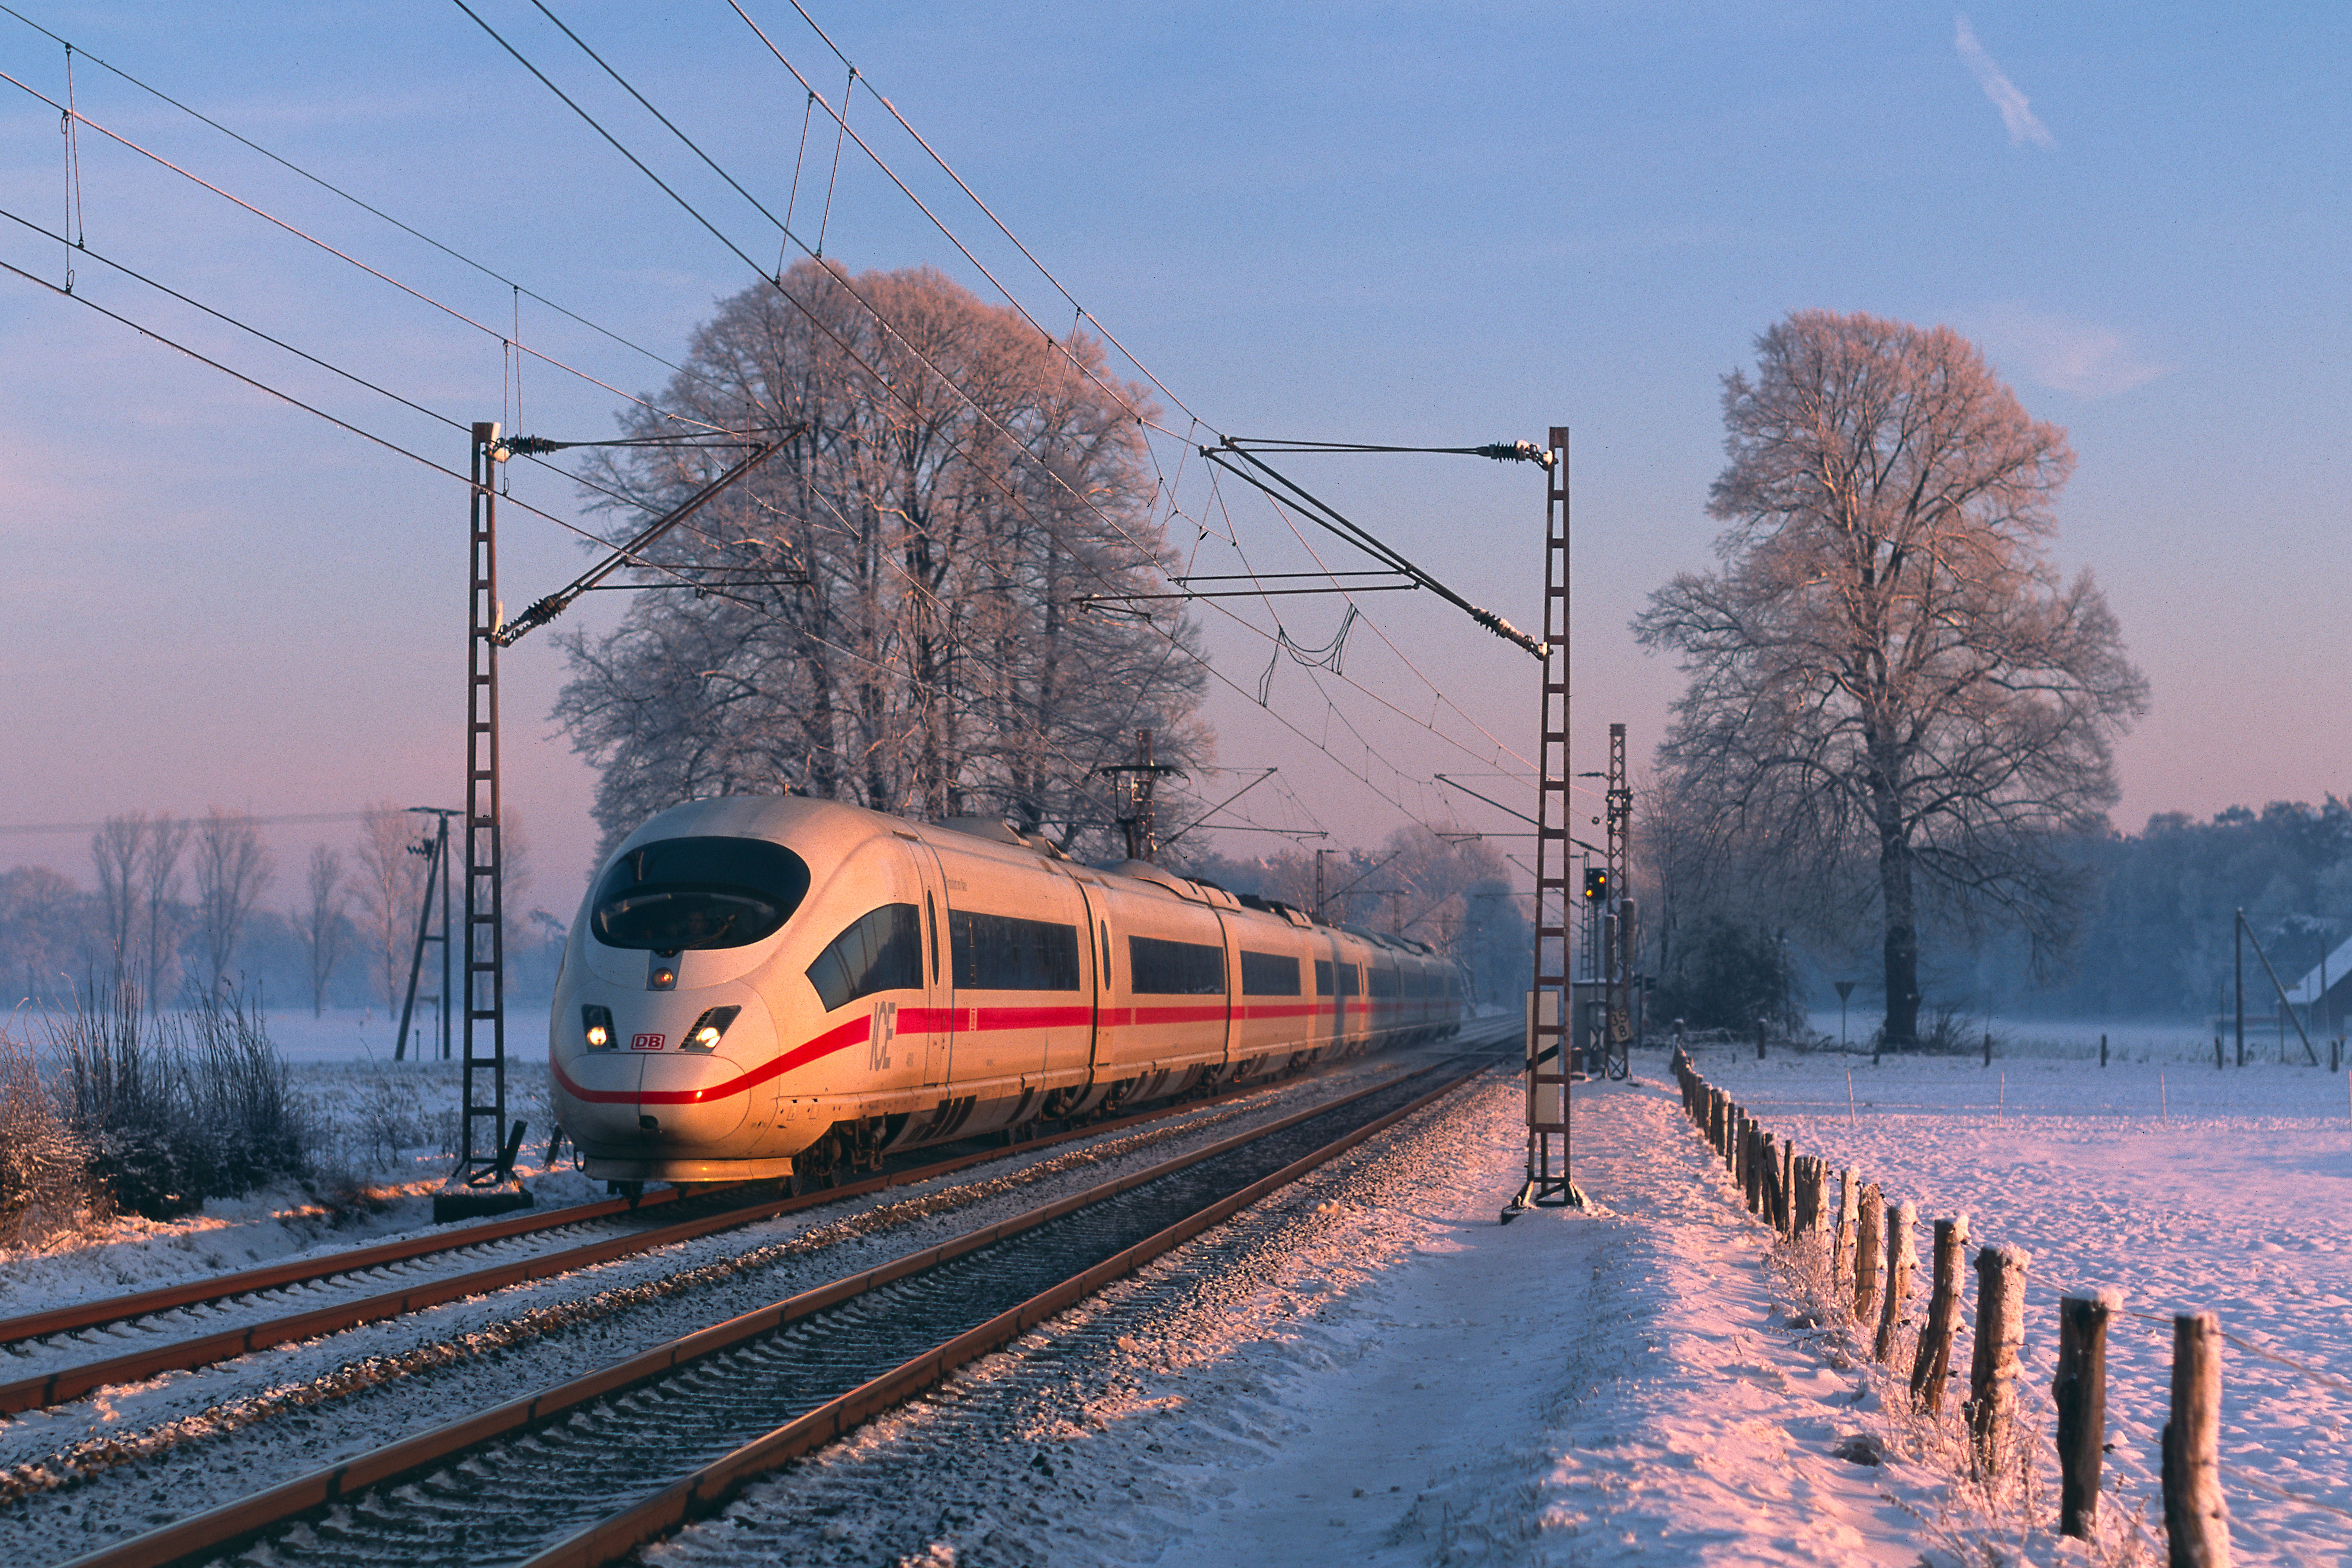 ICE trains form part of the journey to Austria